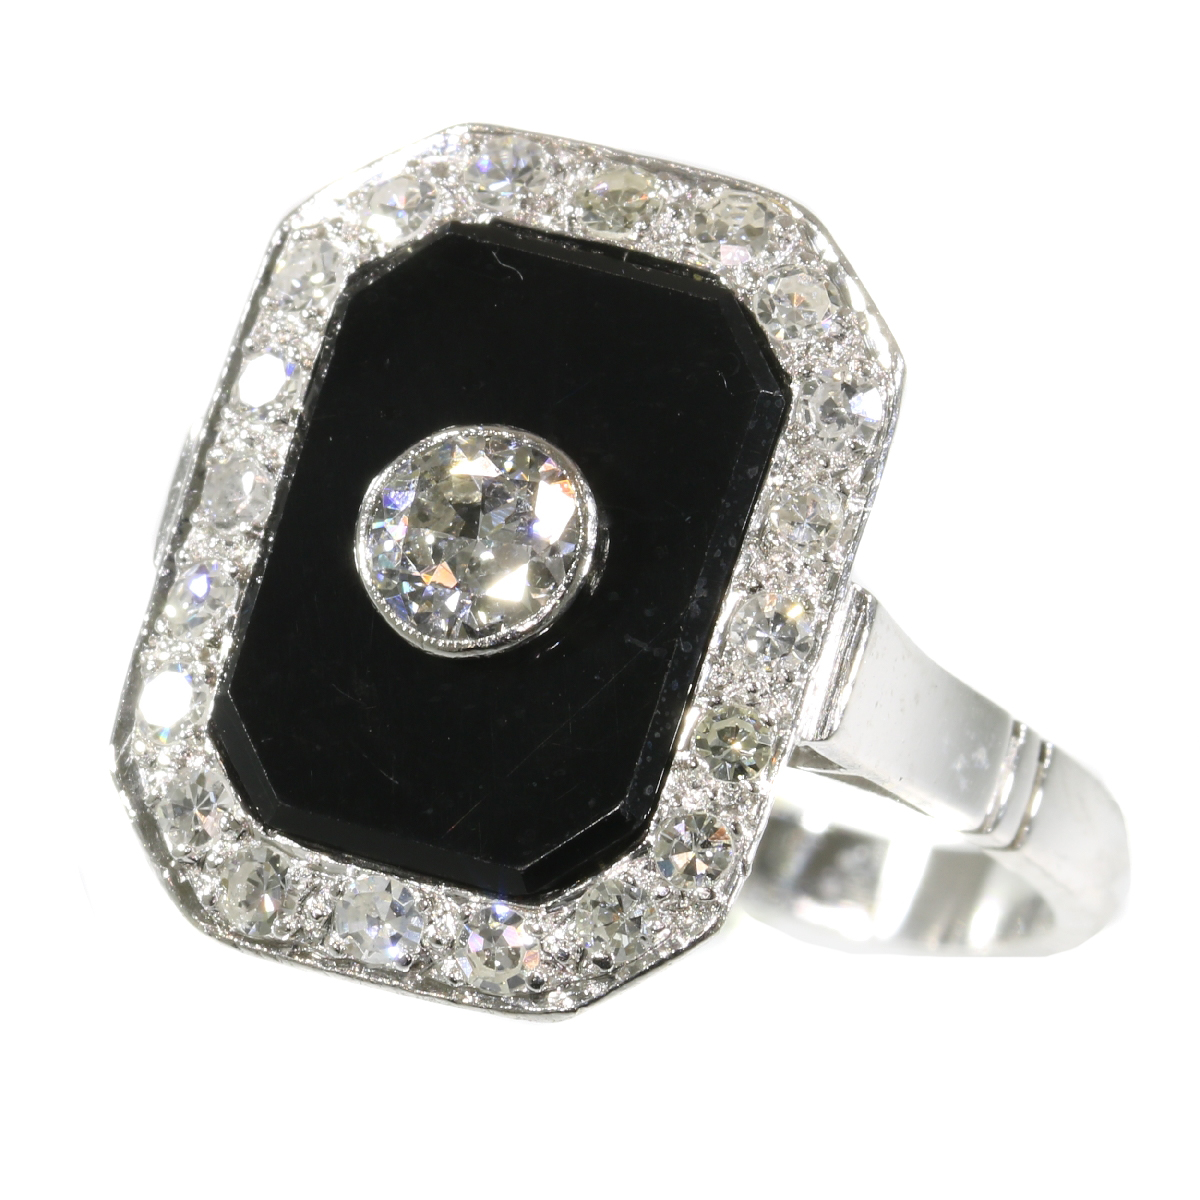 Vintage Platinum Art Deco Style Diamond And Onyx Ring From The Fifties Description By Adin Antique Jewelry